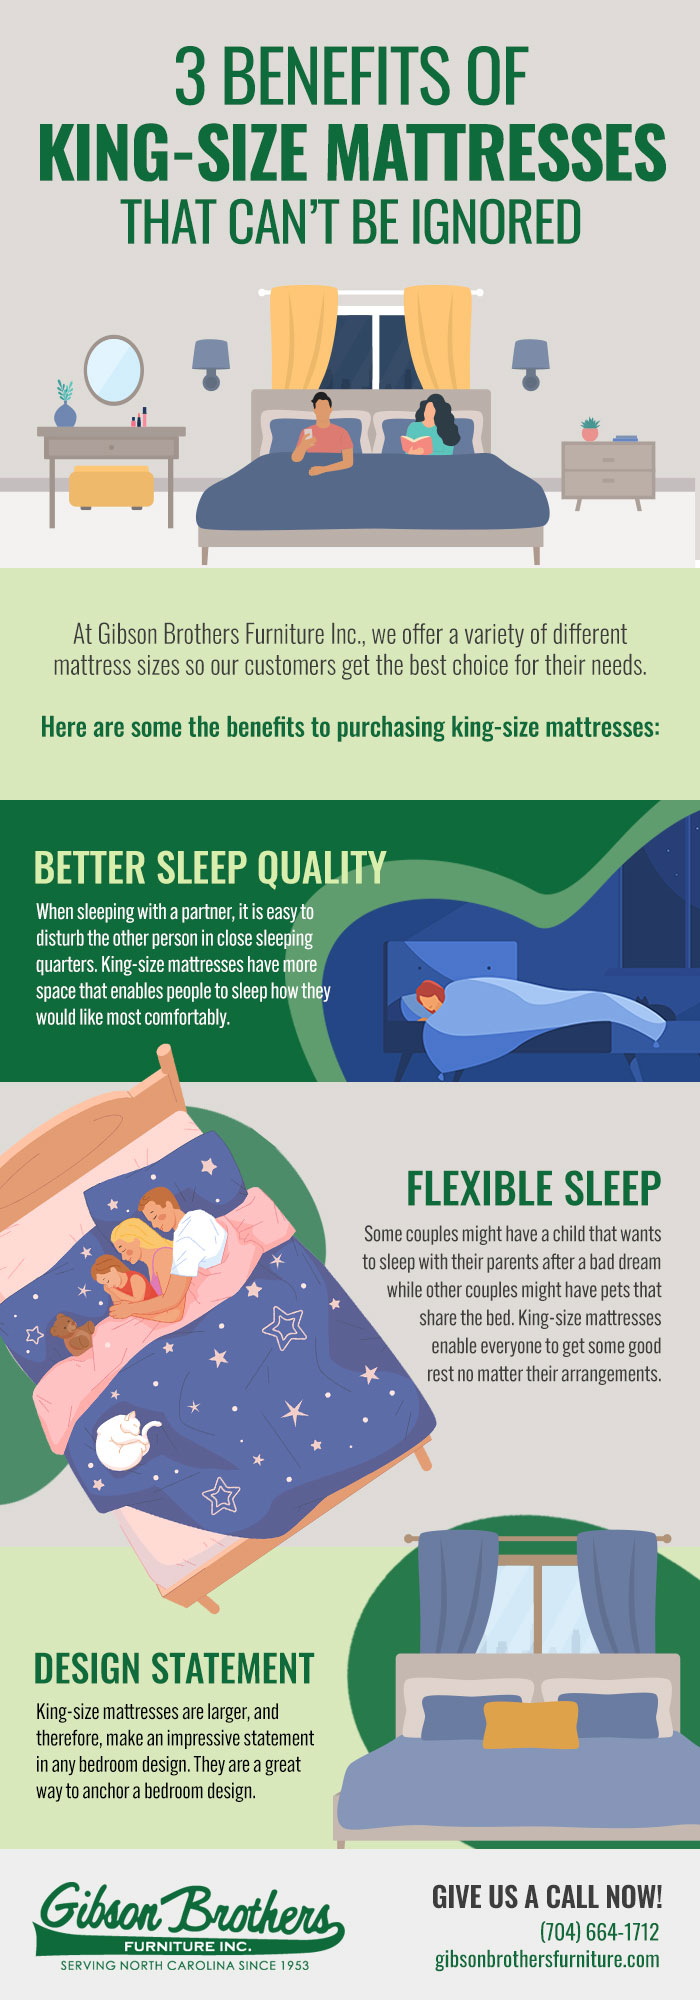 3 Benefits of King-Size Mattresses That Can’t Be Ignored